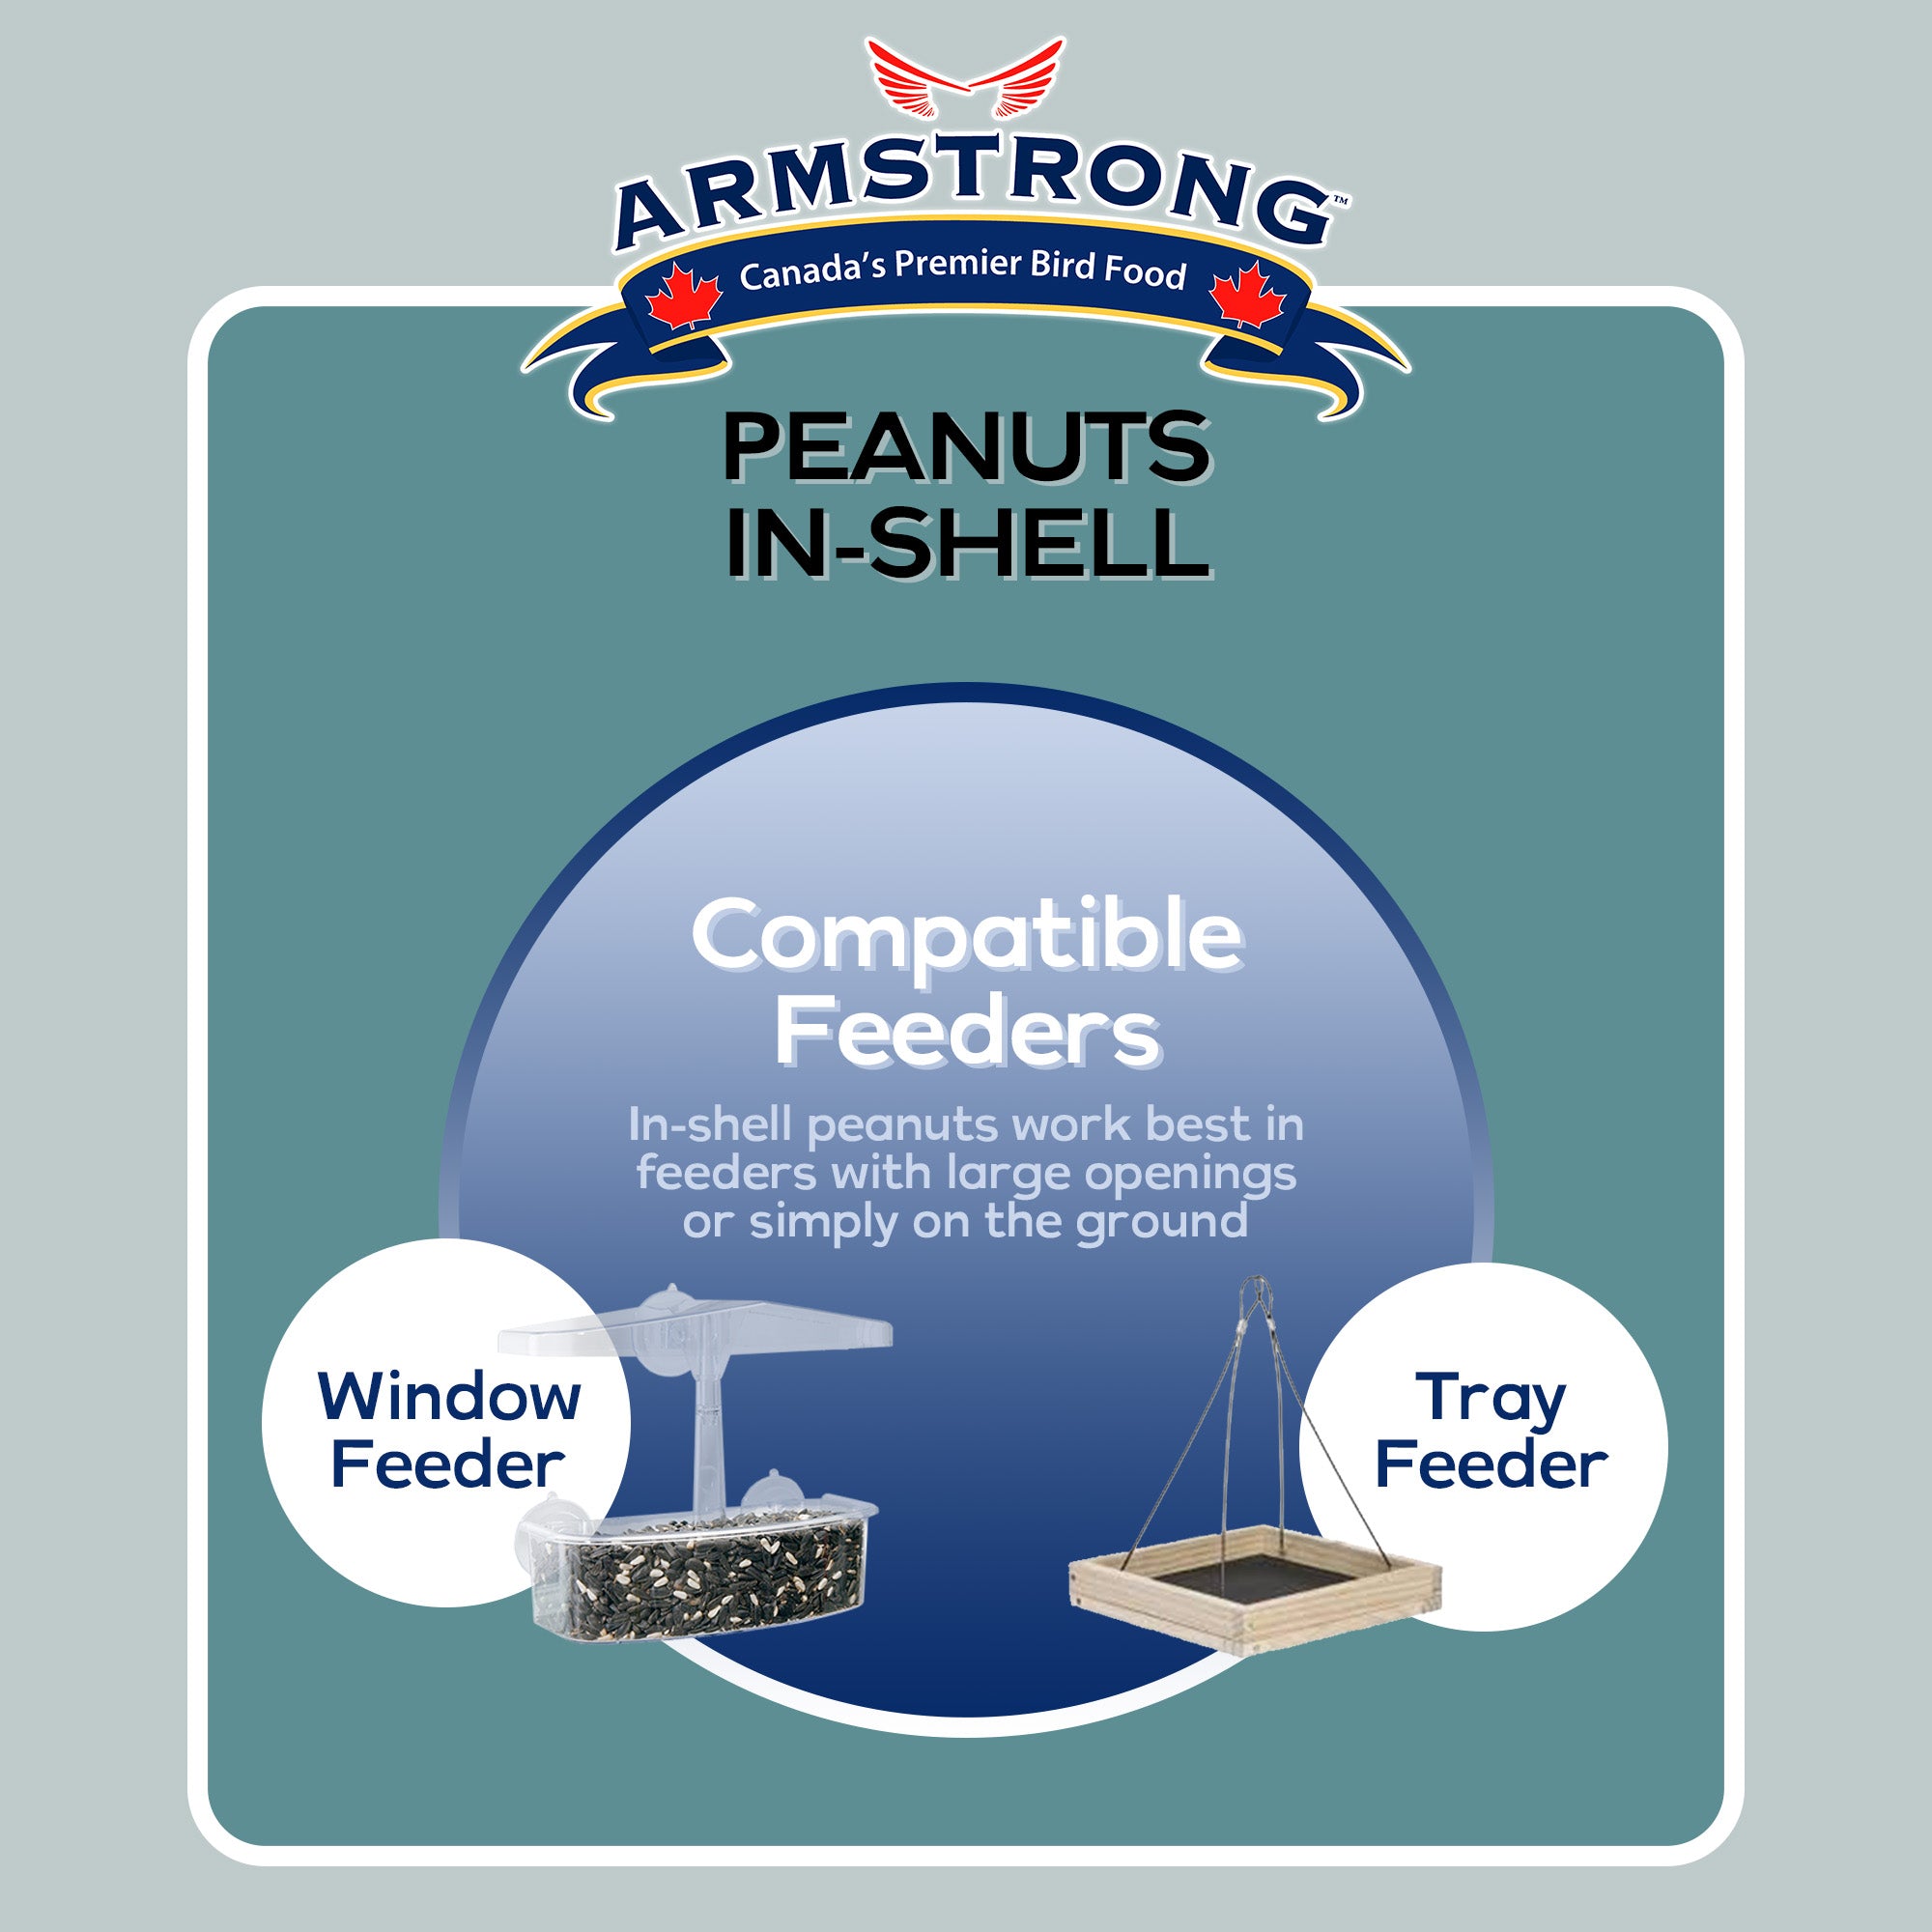 Armstrong Wild Bird Food Peanuts-In-Shell